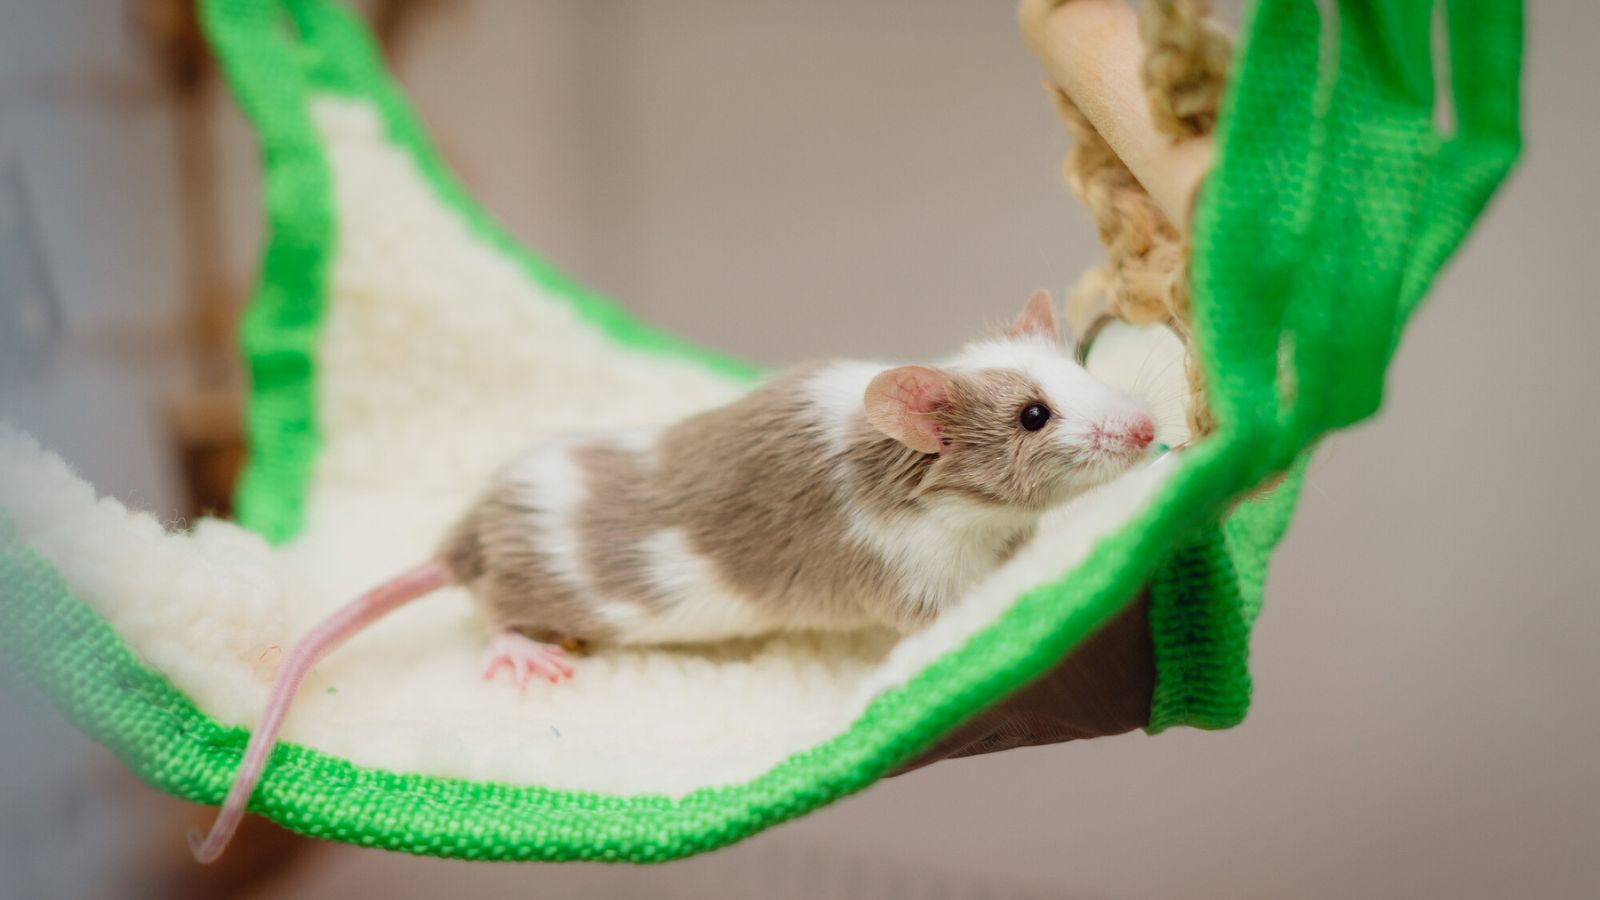 A brown and white mouse explores a green hammock.